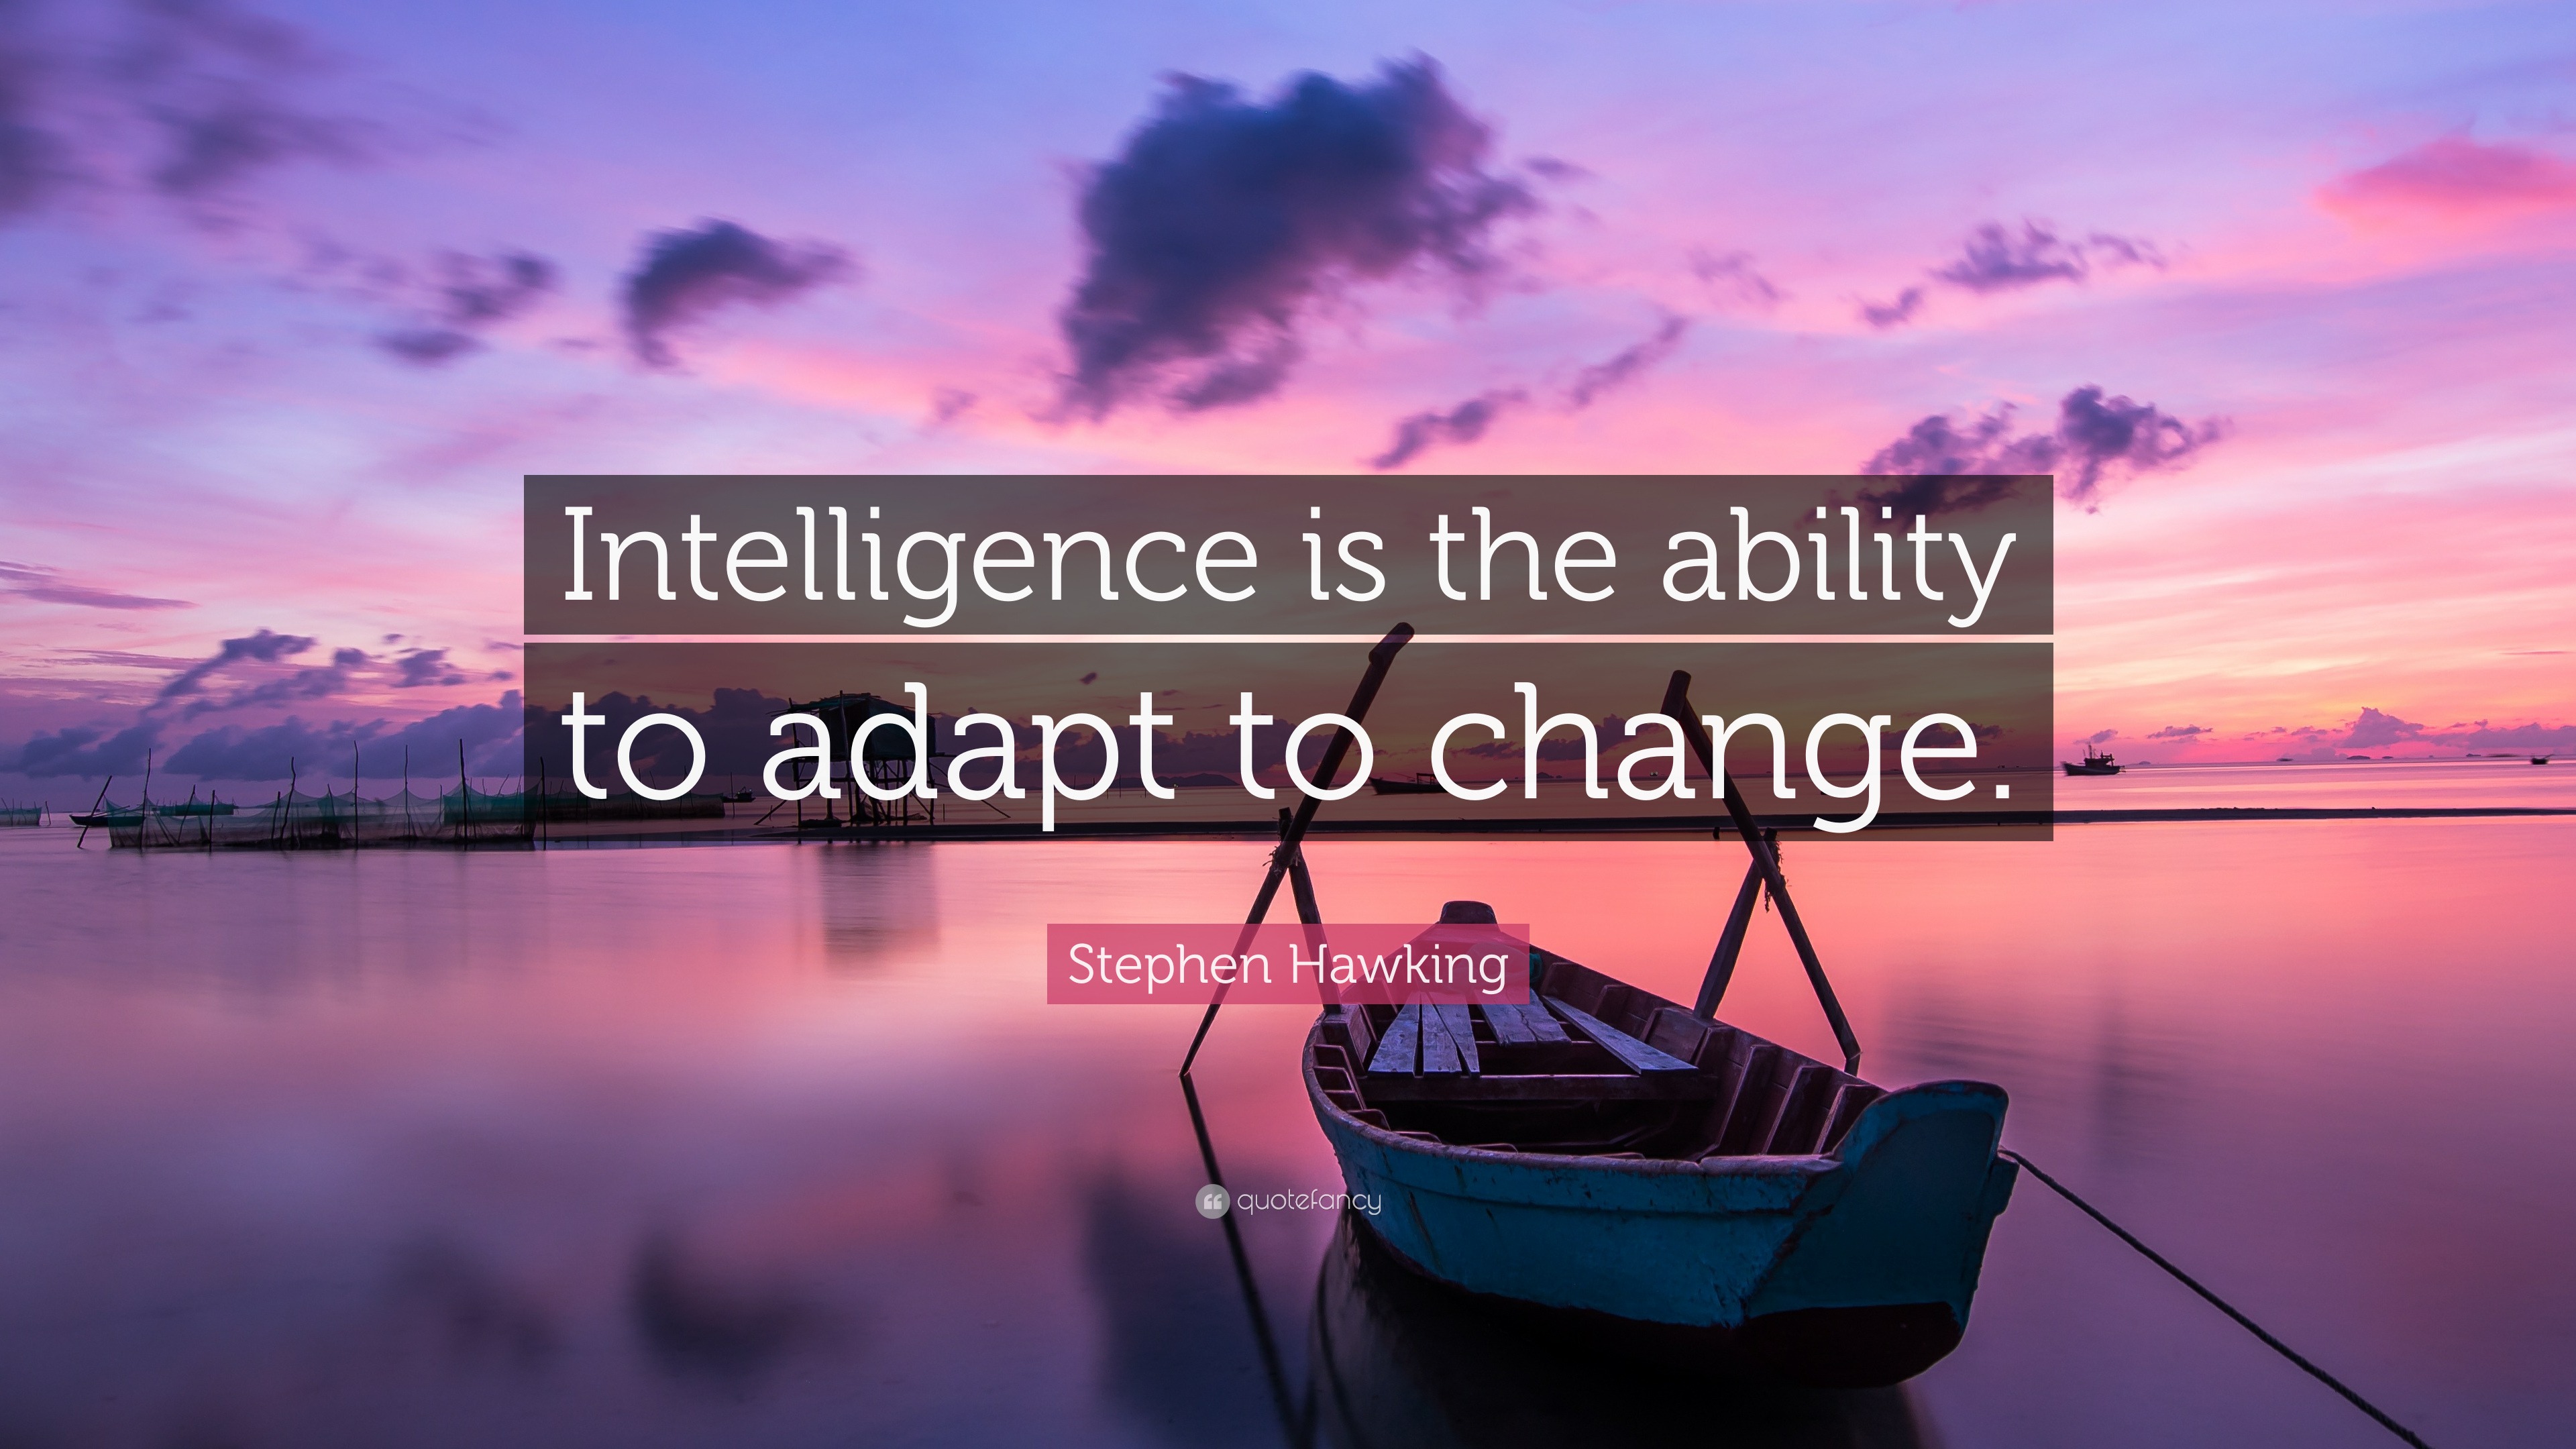 2002620 Stephen Hawking Quote Intelligence is the ability to adapt to